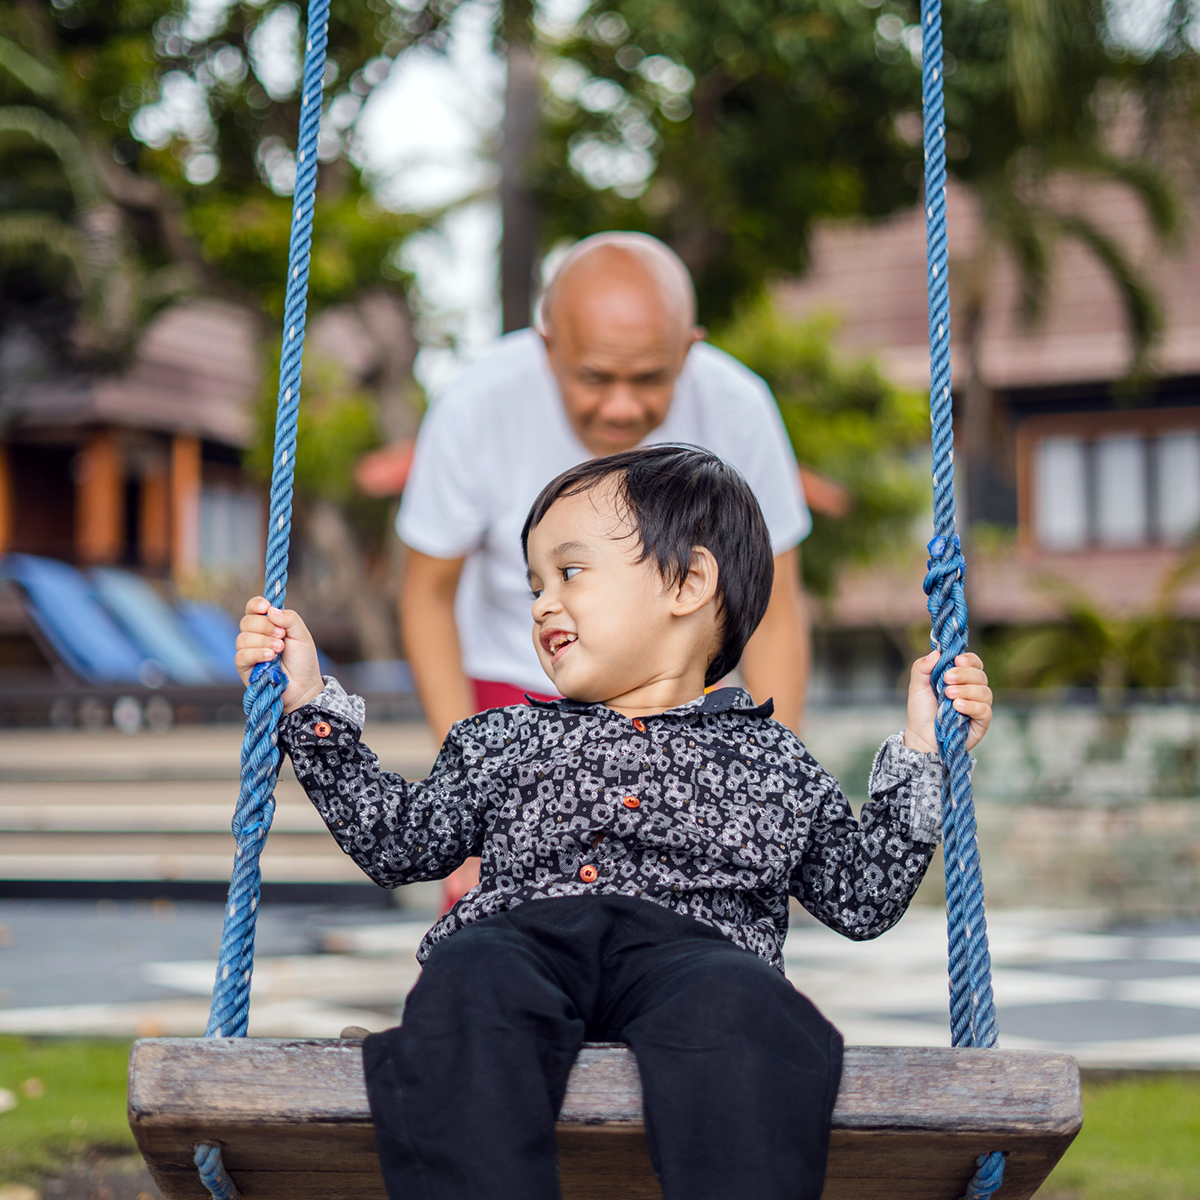 Grandfather pushing their grandchild on a park swing.